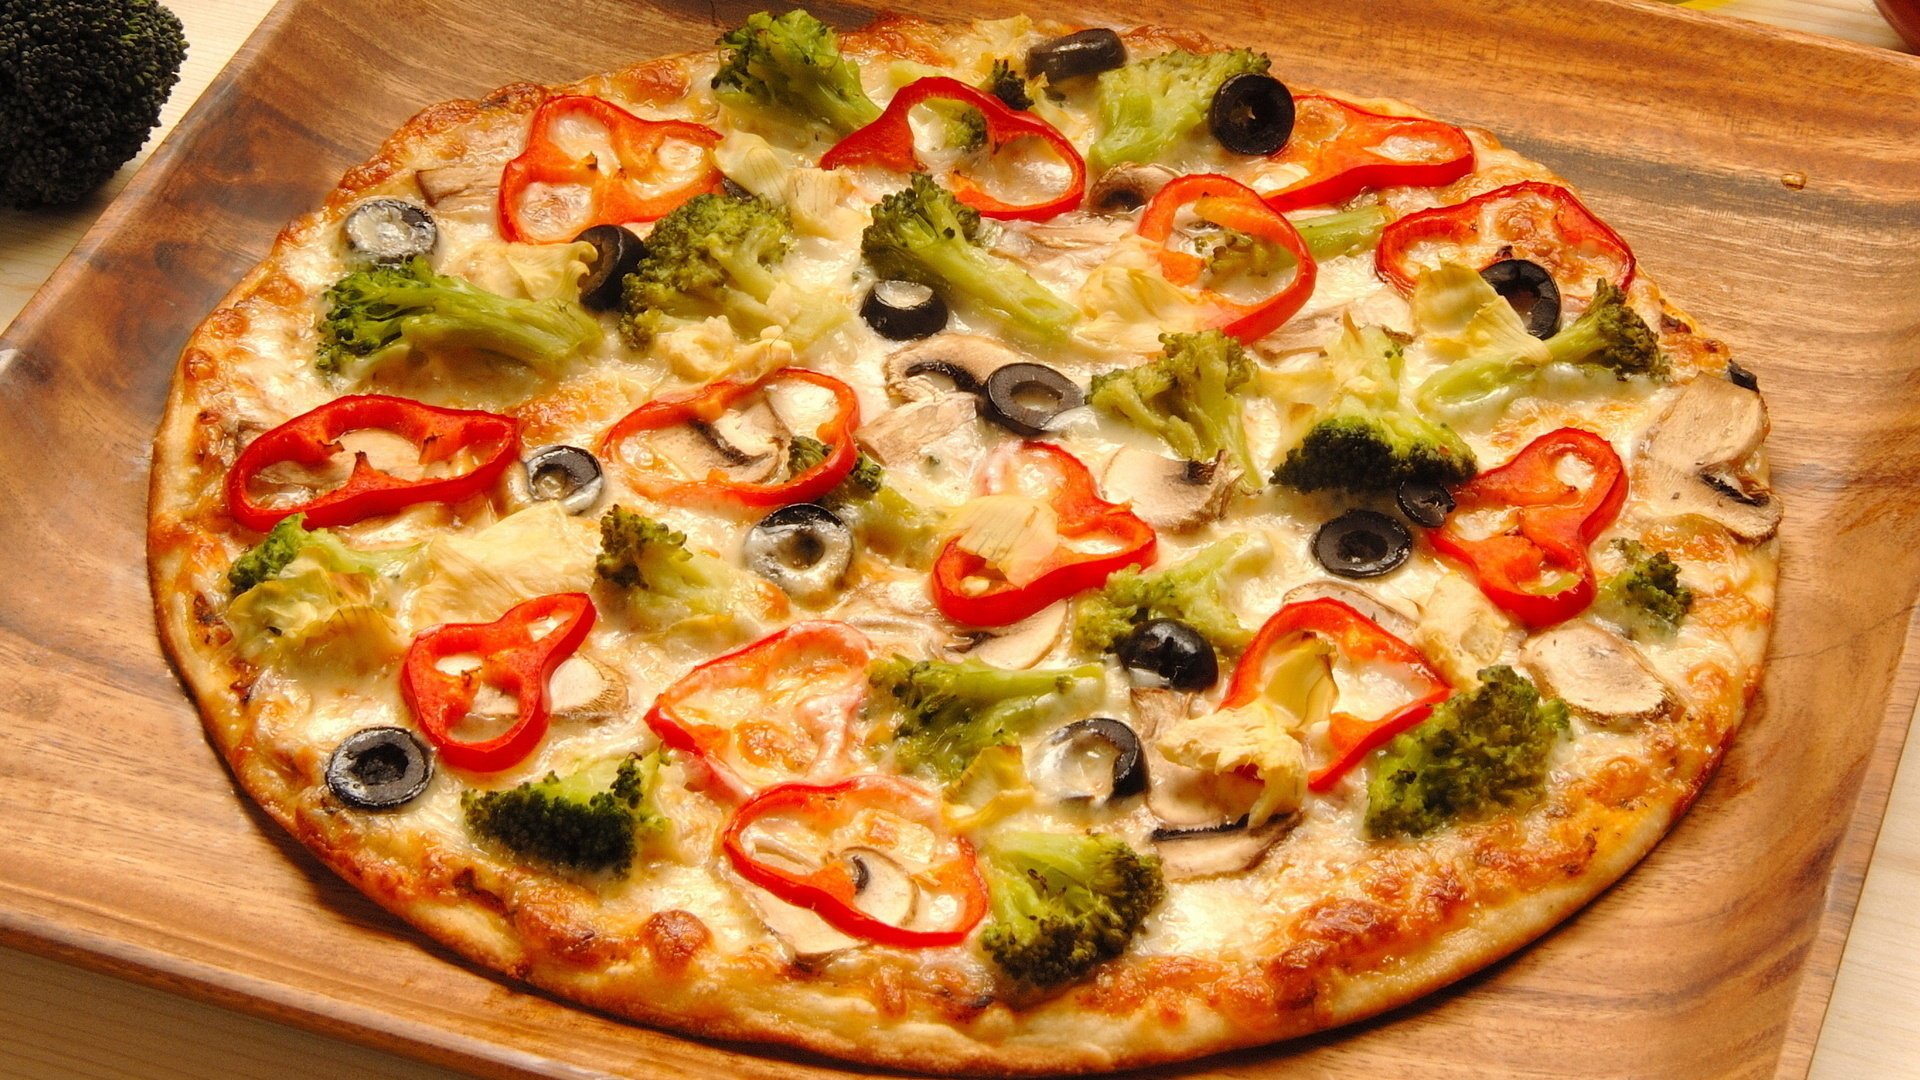 Italian vegetable pizza with broccoli and pepper